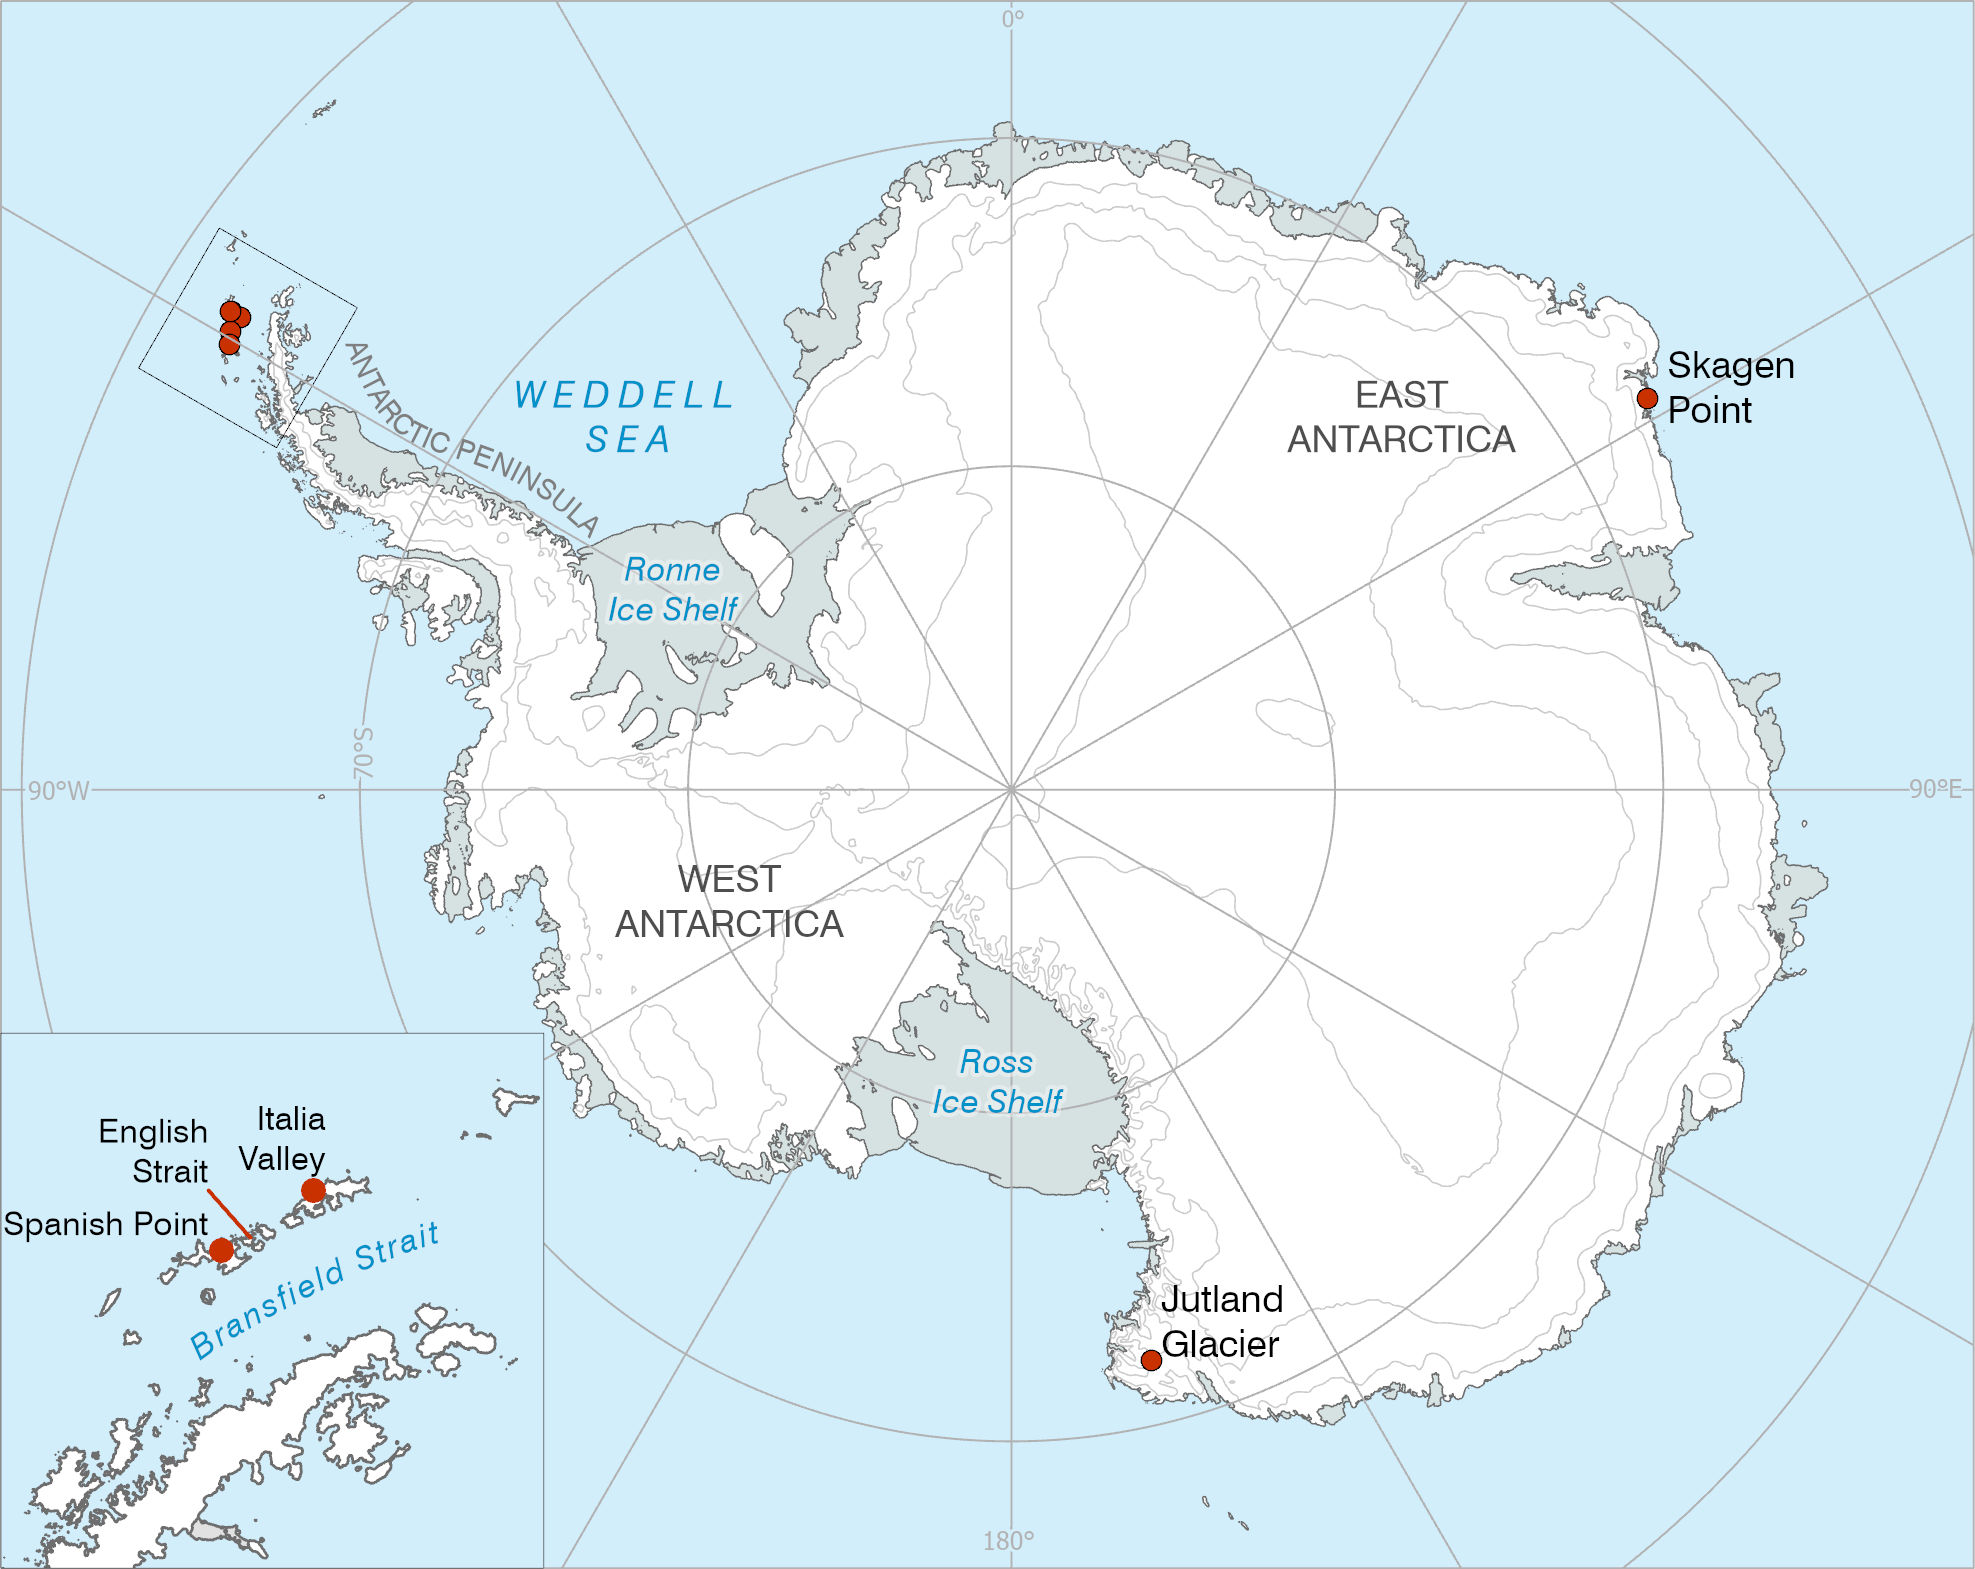 Map showing Antarctic place names related to Euro 2020 competitors